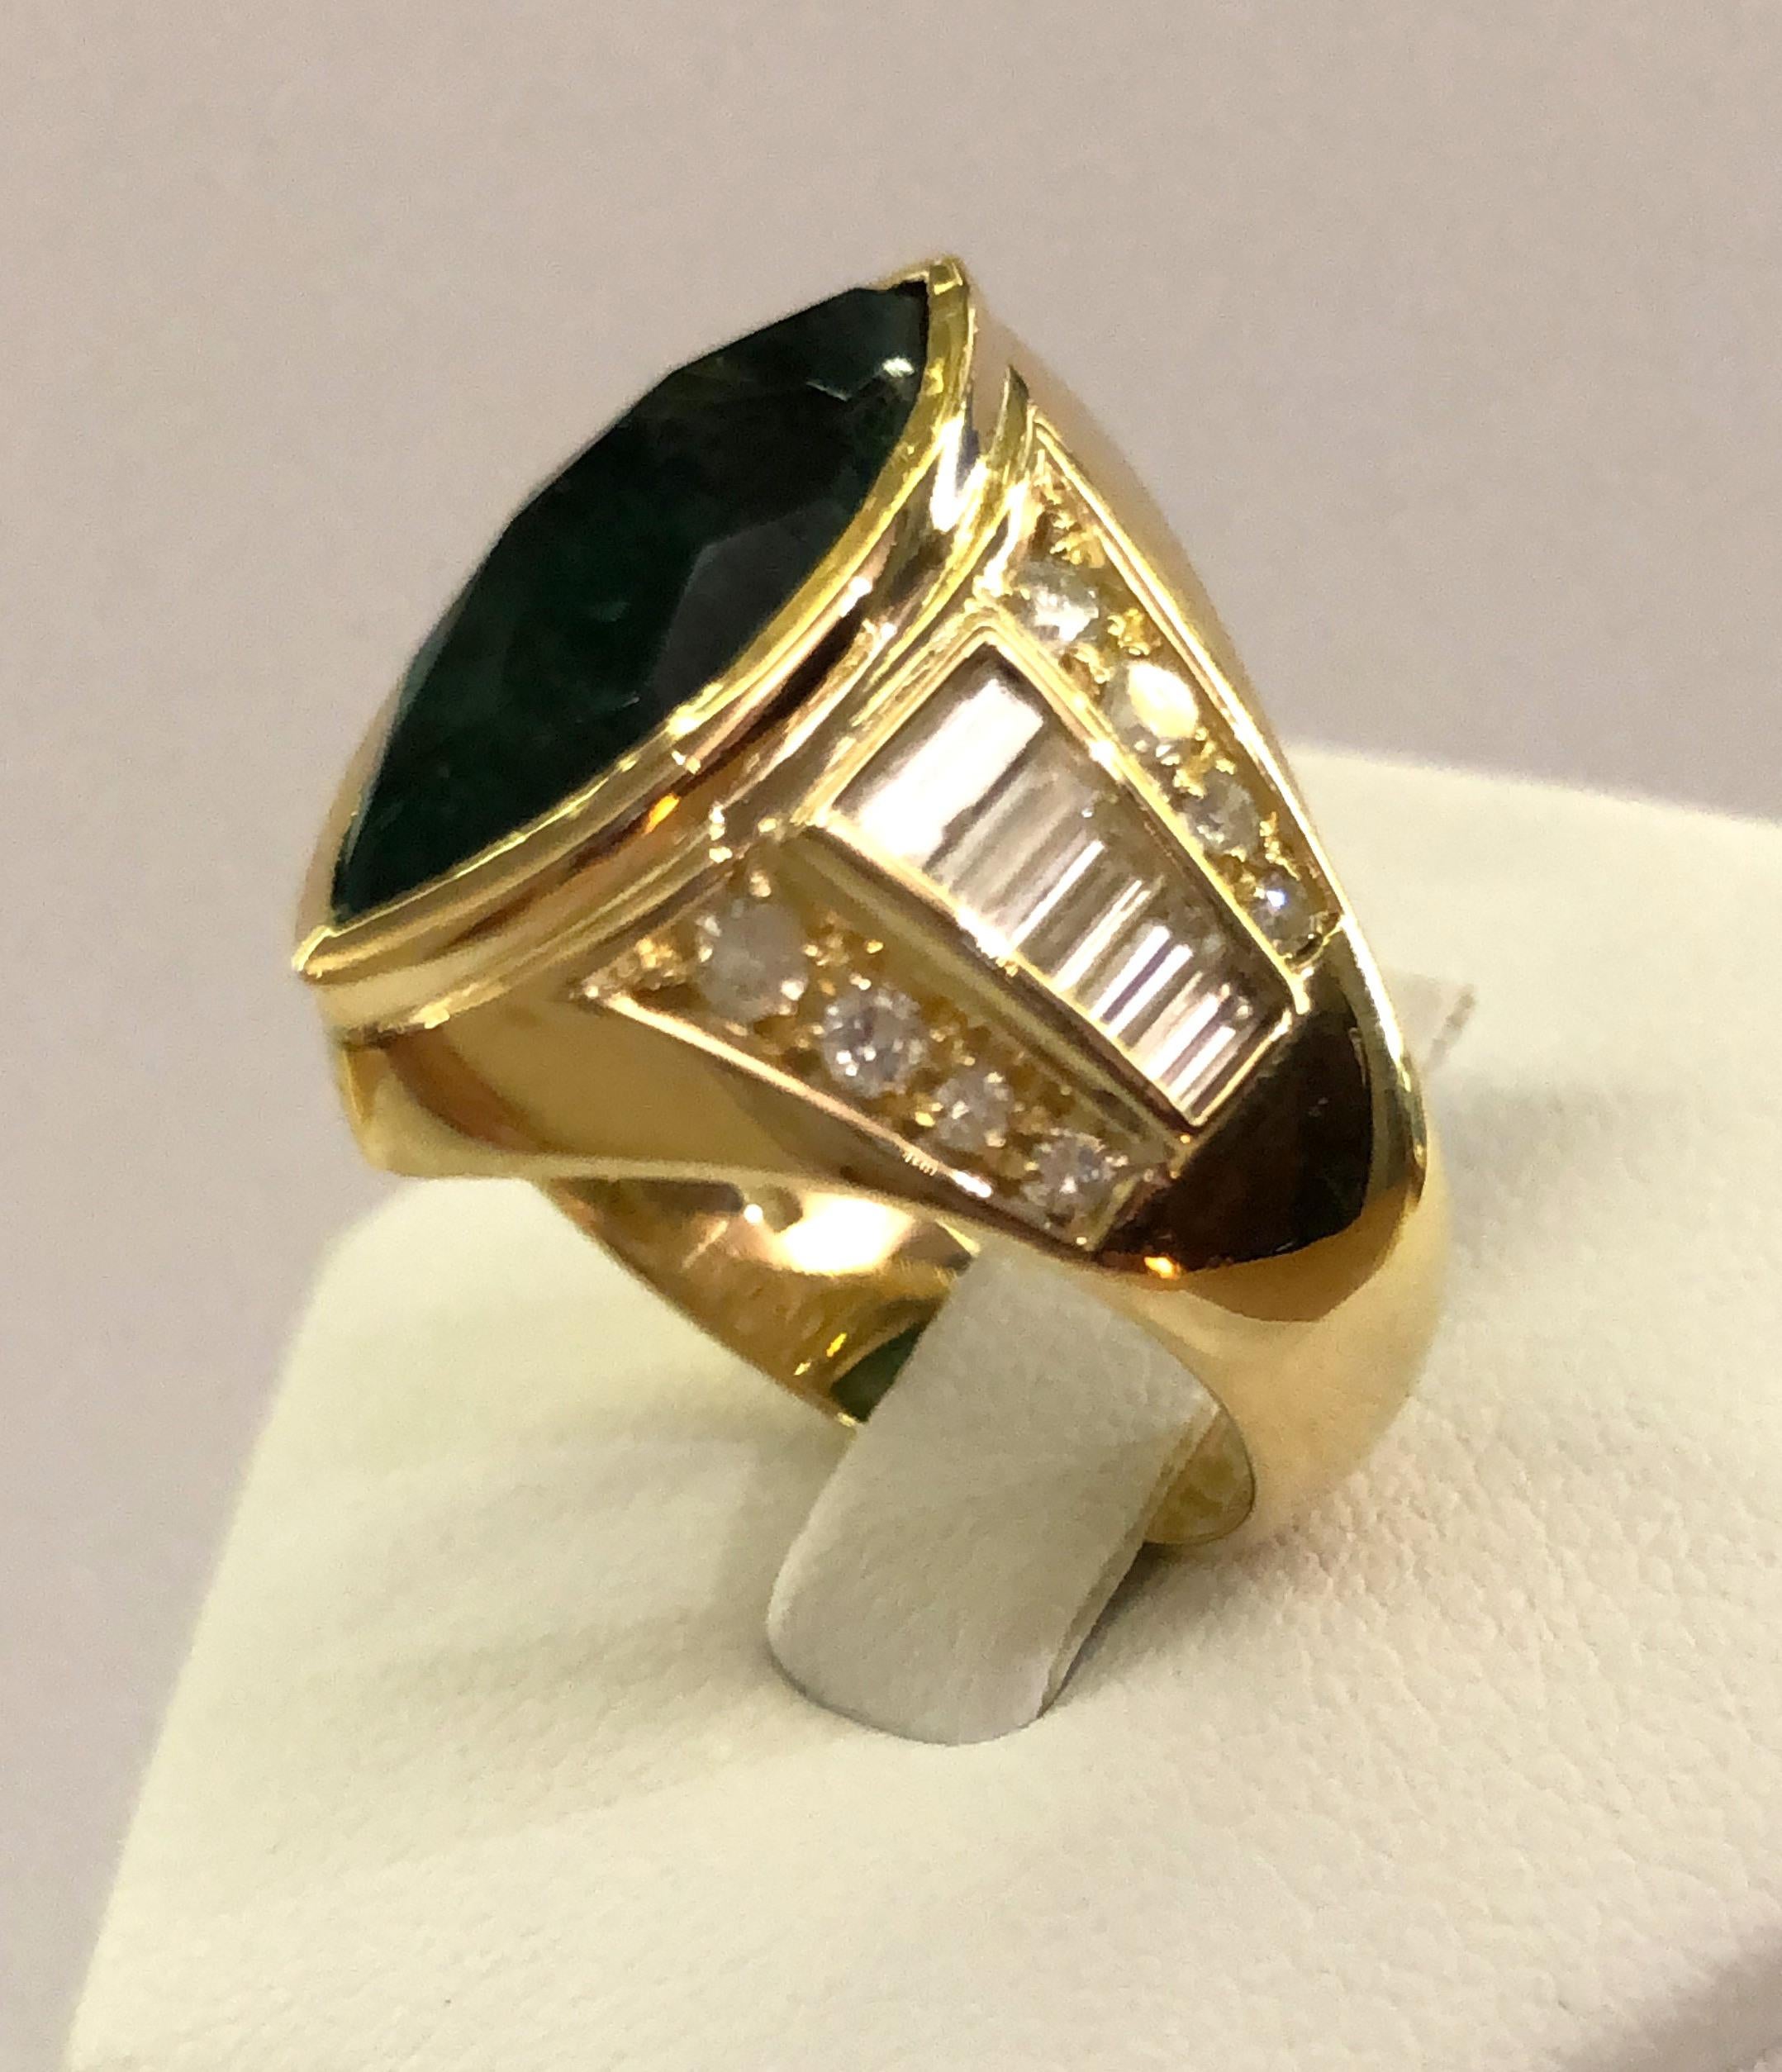 Vintage 18 karat gold ring, with a large diamond shaped emerald in the center, and brilliant diamonds on the stem for a total of 1.2 karats, Italy 1950-1970s
Ring size US 6.5